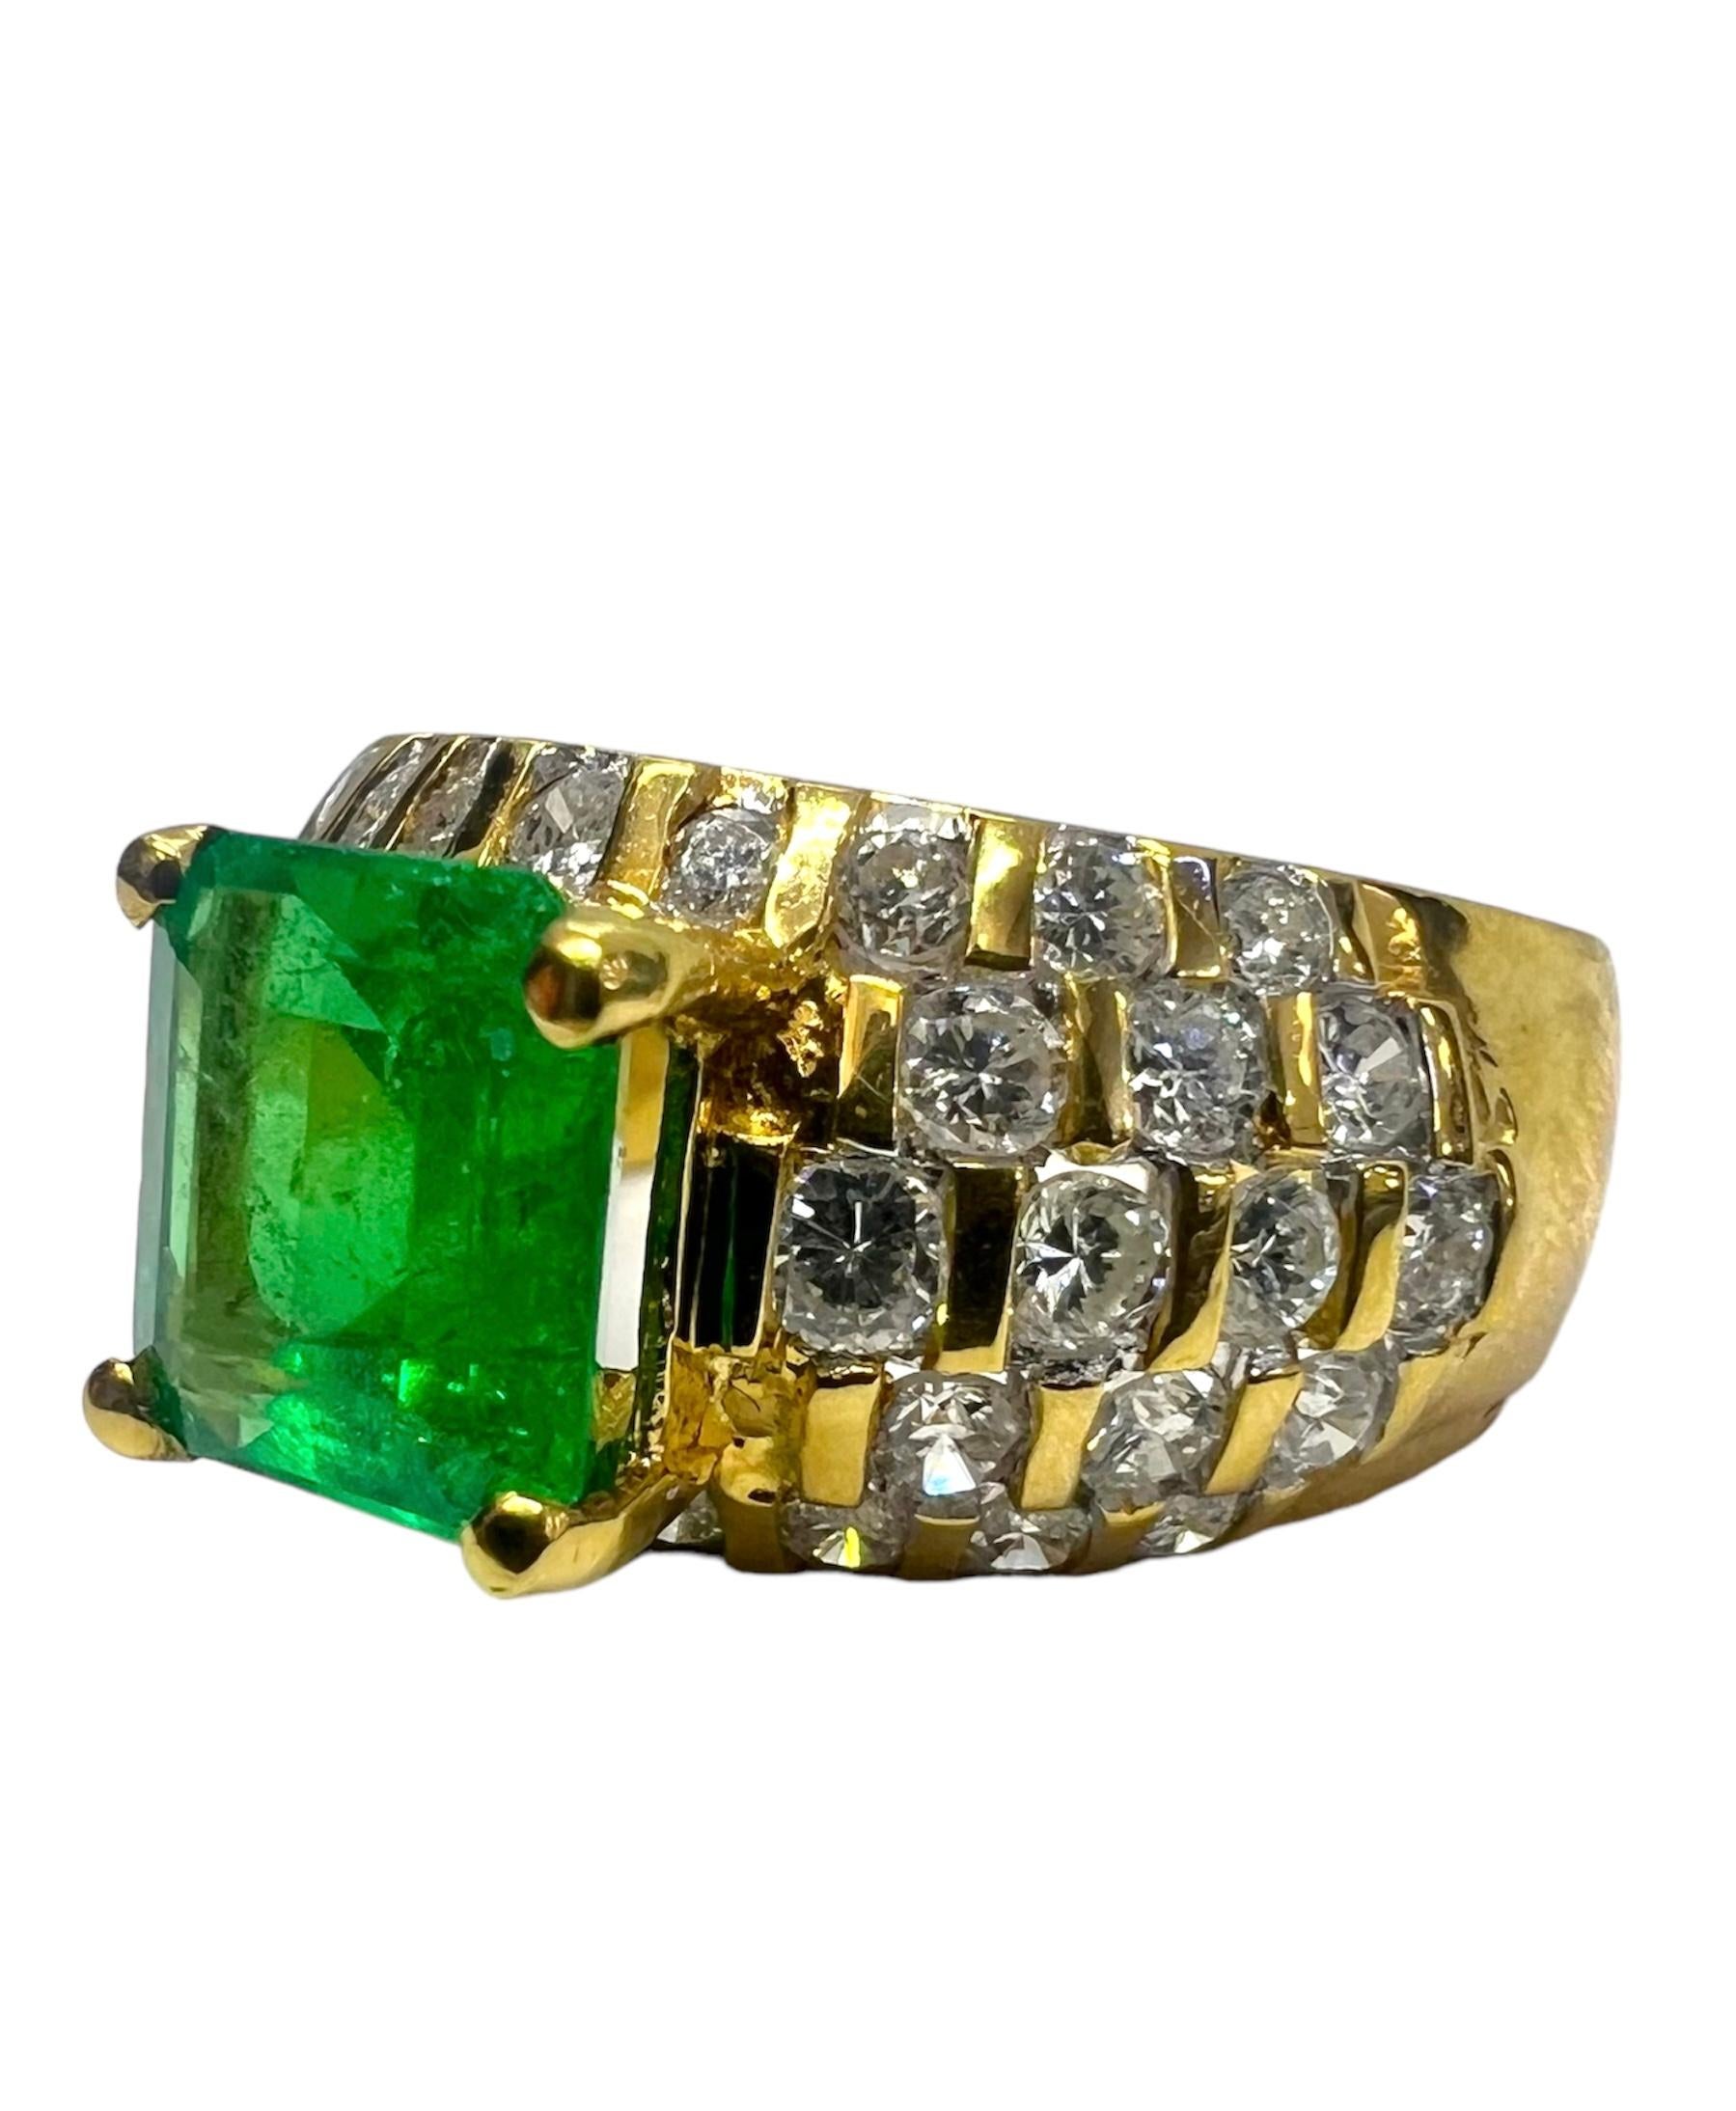 18K yellow gold ring with emerald center stone accented with diamonds.

Sophia D by Joseph Dardashti LTD has been known worldwide for 35 years and are inspired by classic Art Deco design that merges with modern manufacturing techniques.